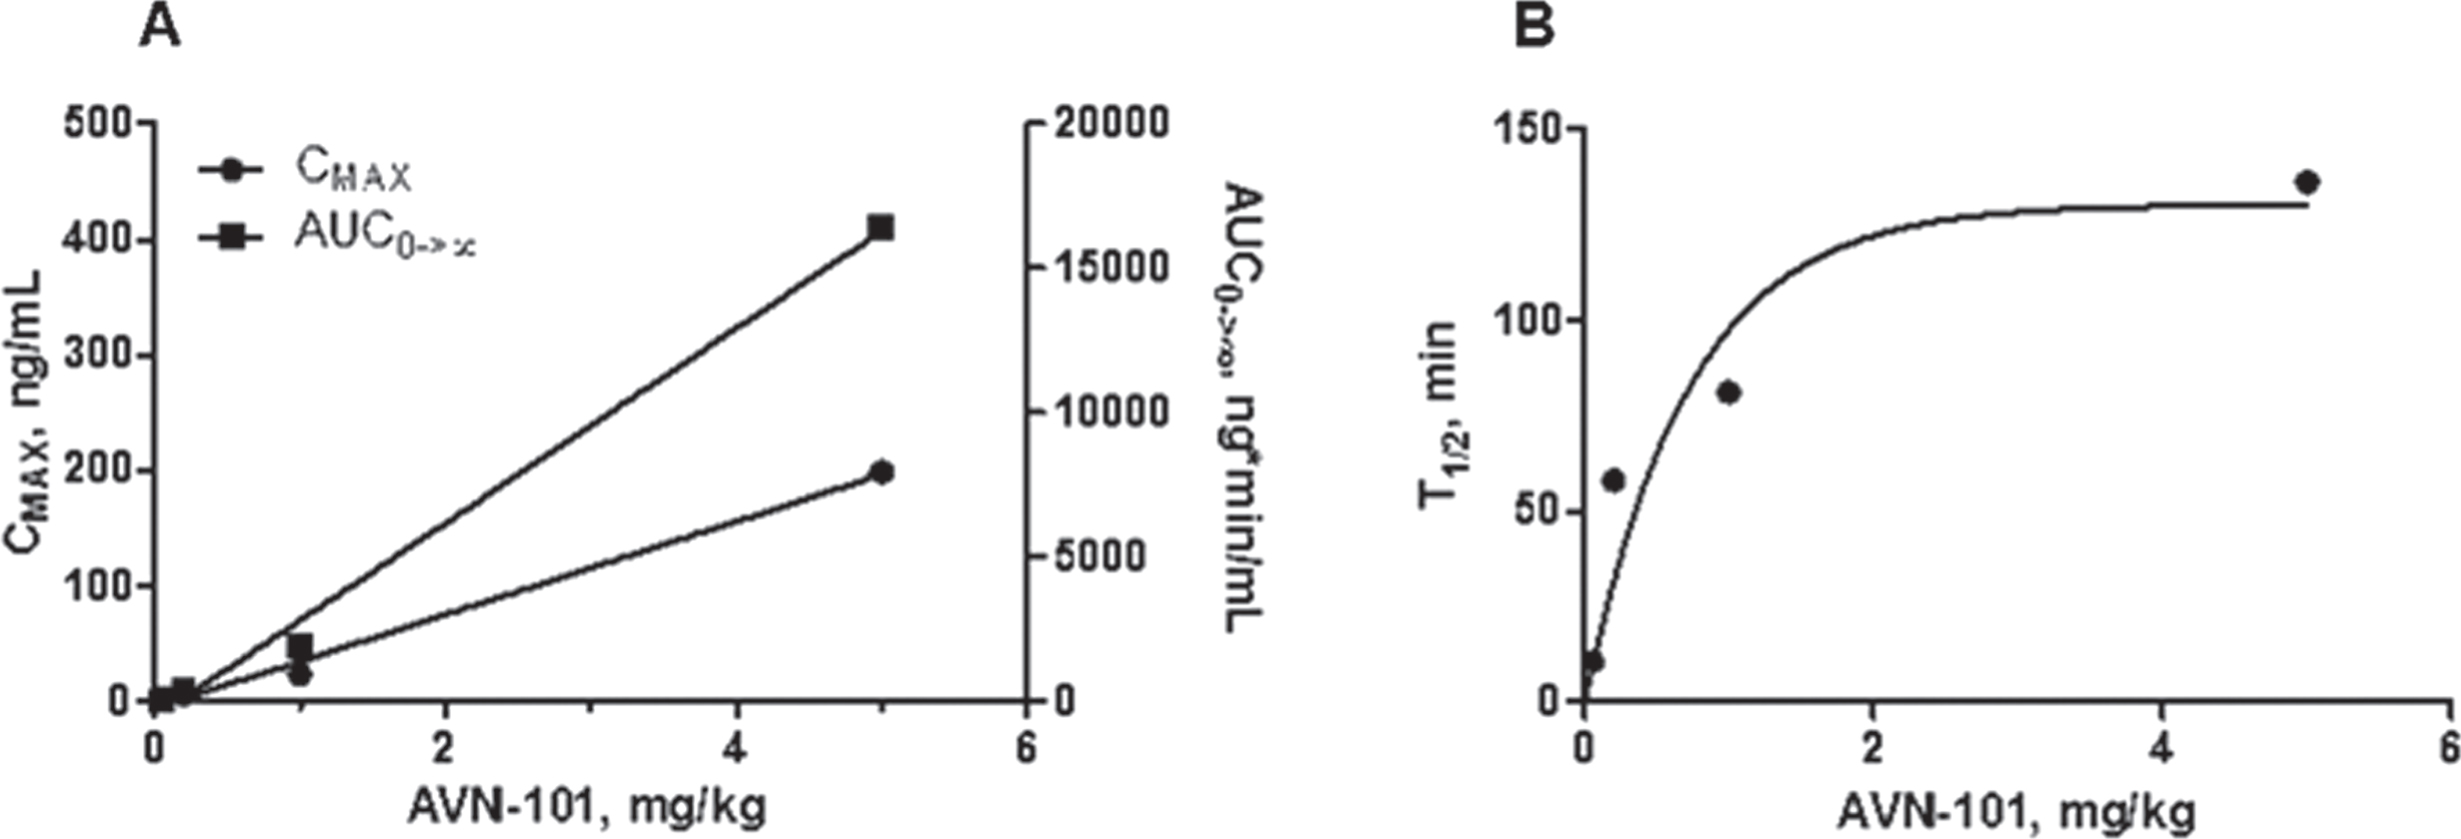 AVN-101 PK in mice blood upon IP administration. A) Dose dependence of maximal concentration (CMAX) and exposure (AUC0 - >∞) of the AVN-101. B) Half-life of elimination (T1/2) of the AVN-101.